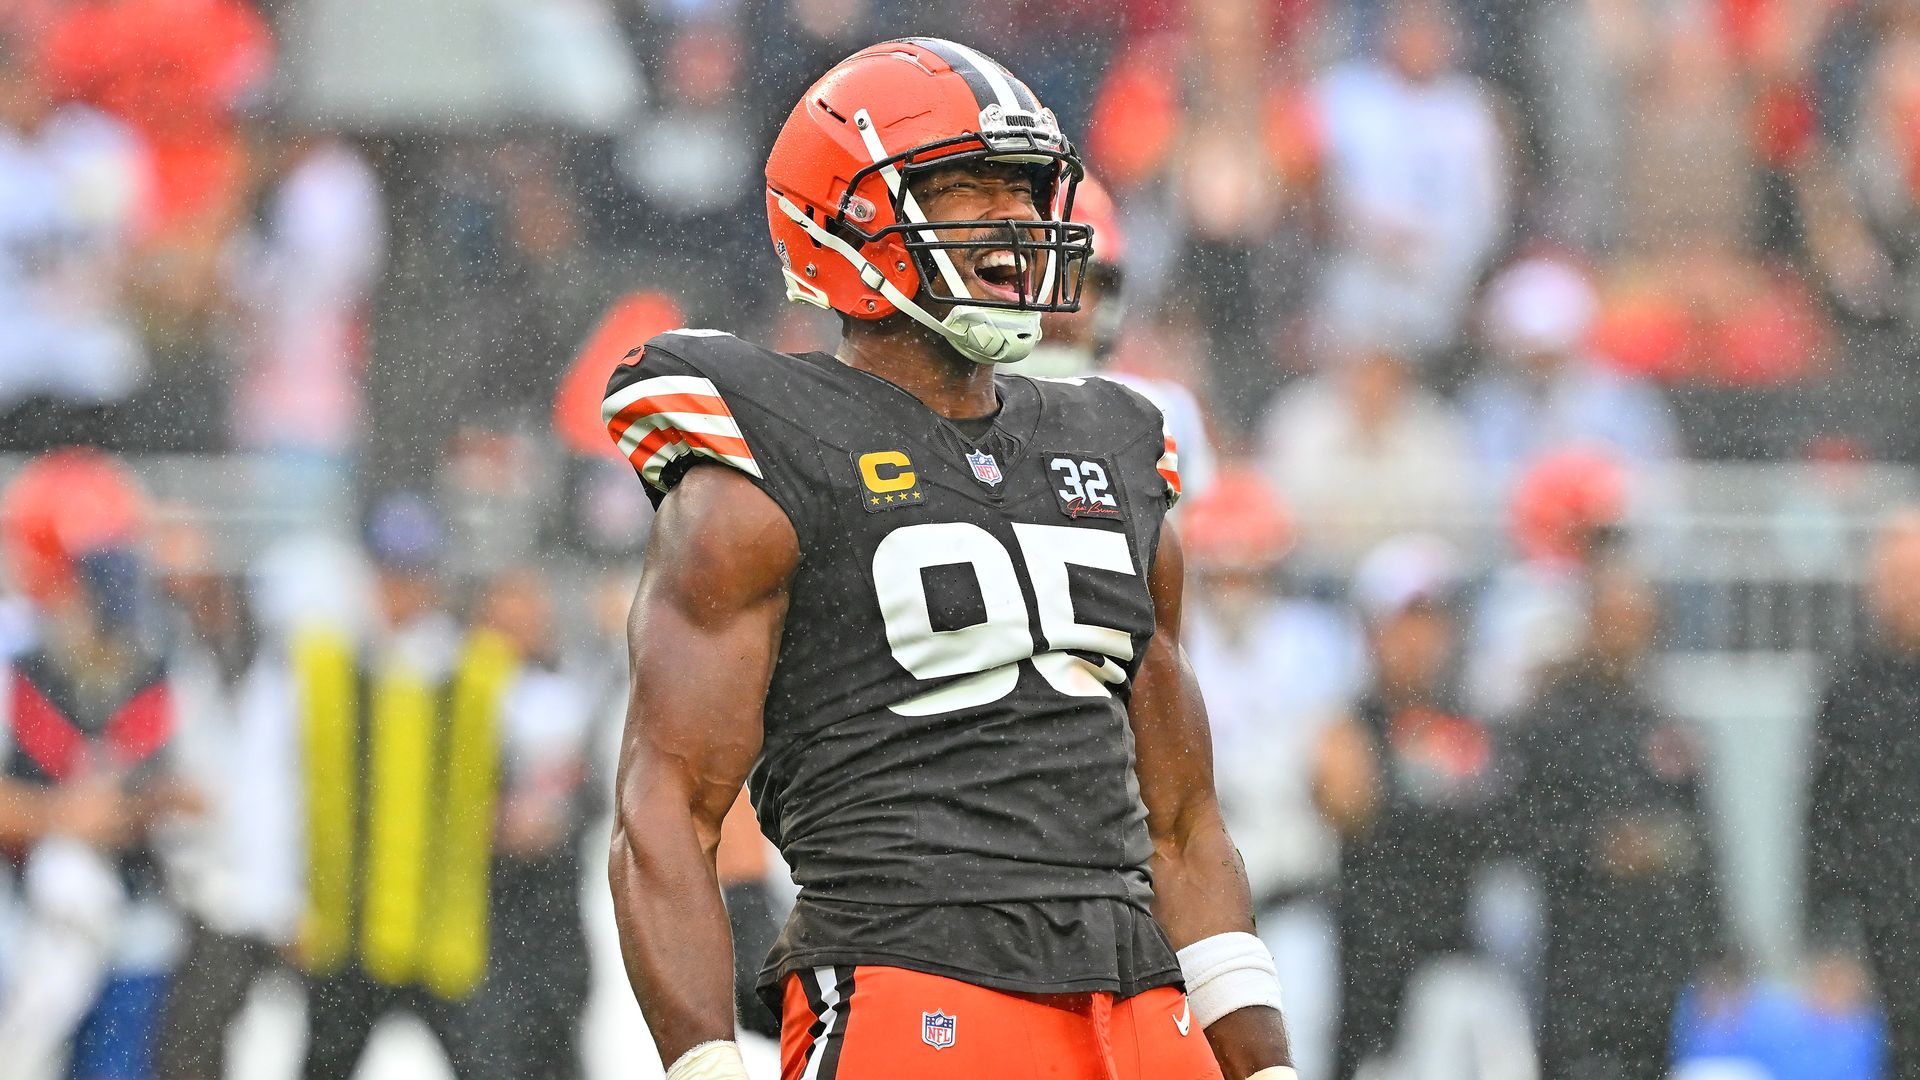 Myles Garrett of the Browns celebrates after a big play. 